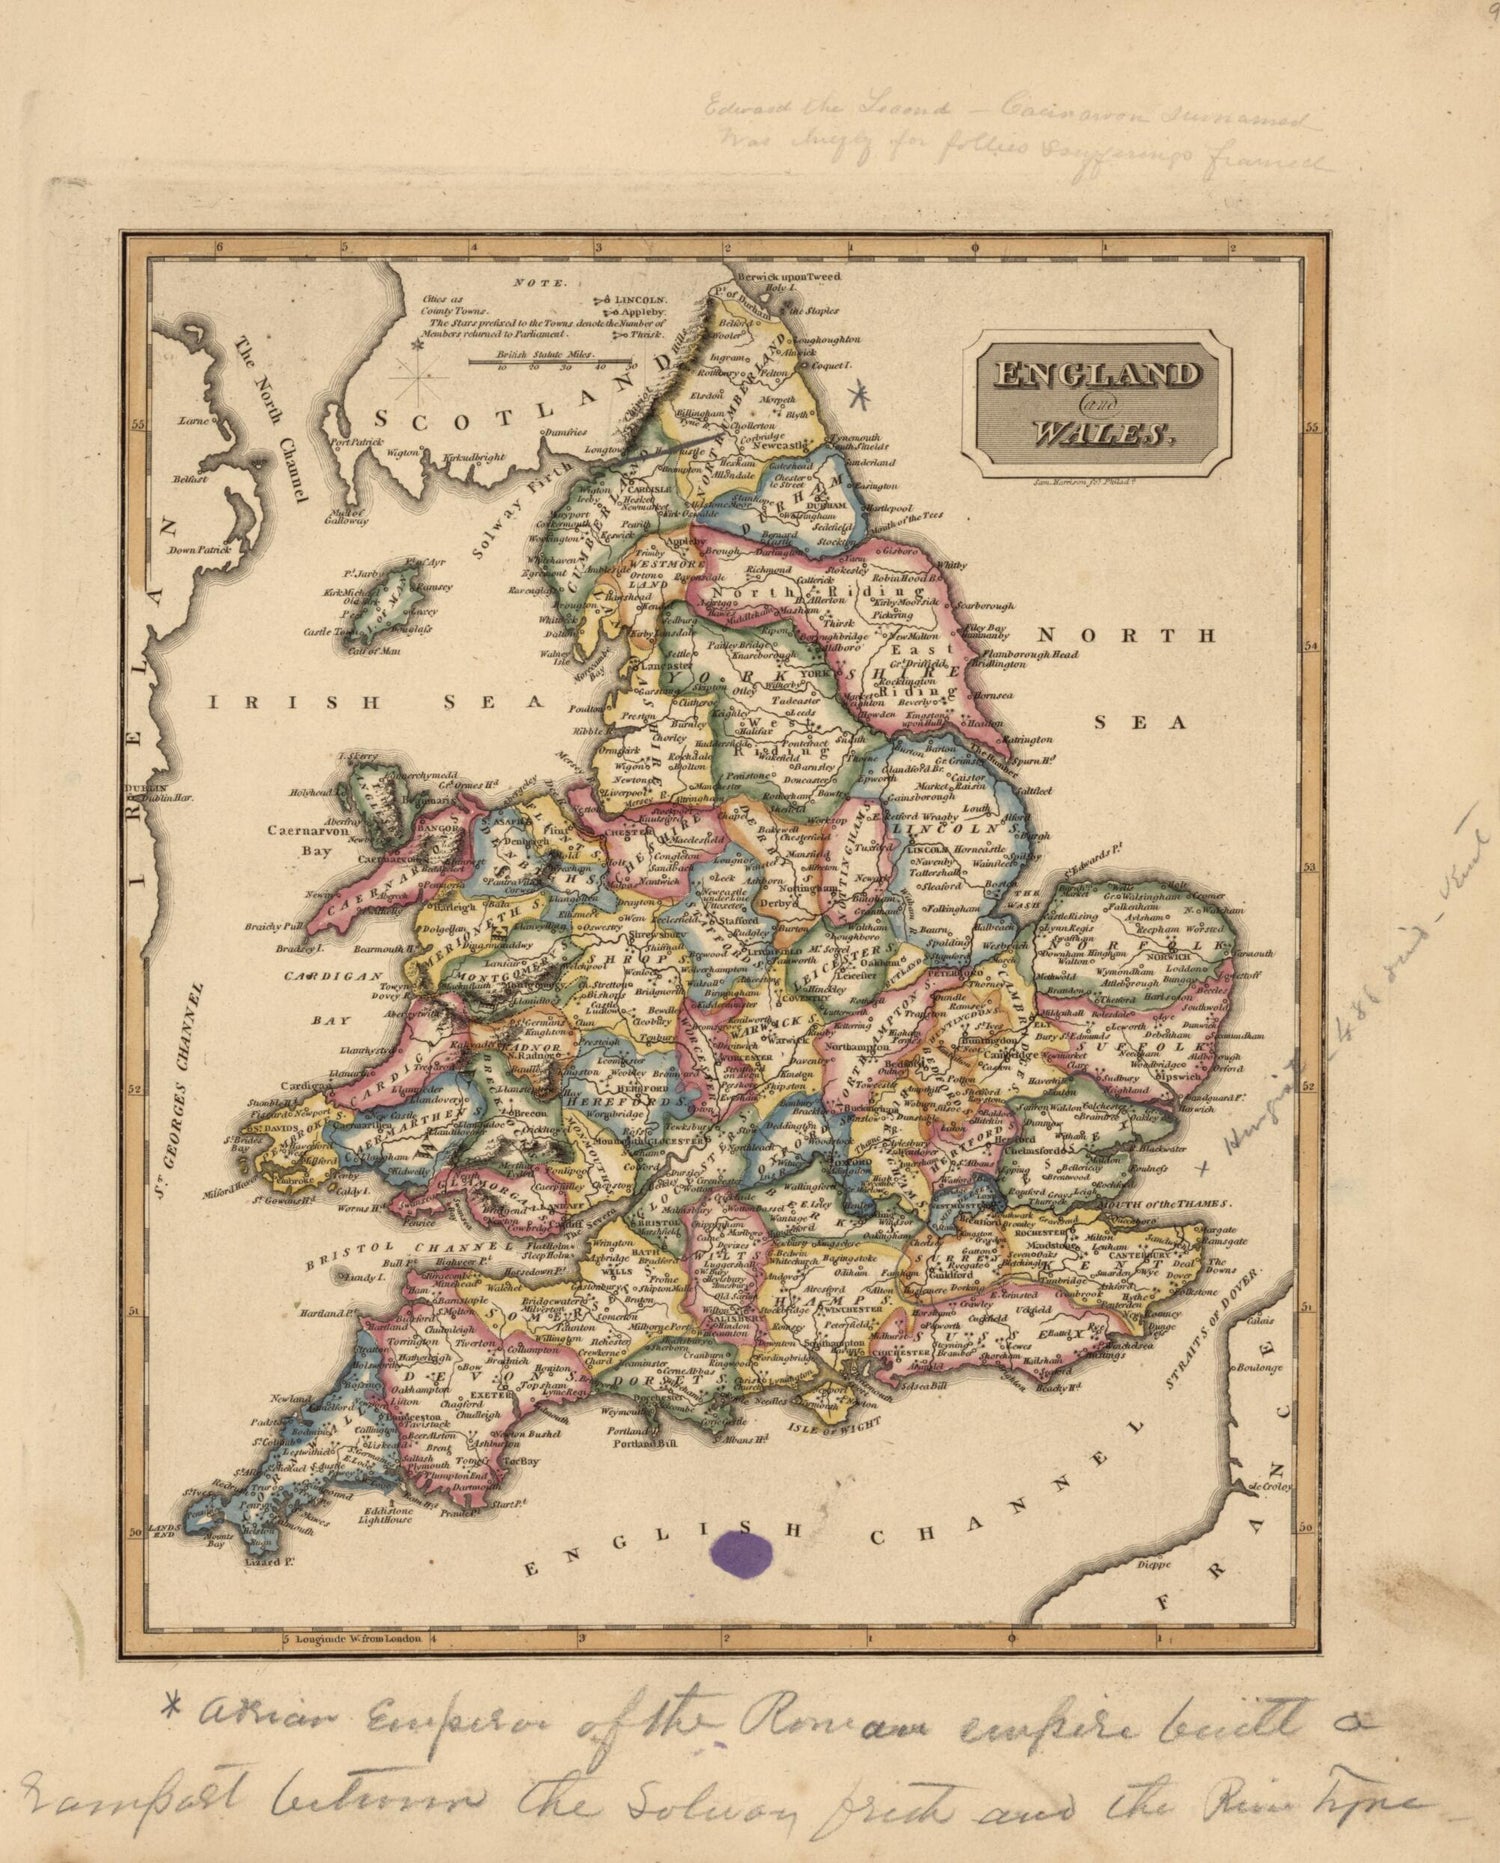 This old map of England and Wales from a New and Elegant General Atlas, Containing Maps of Each of the United States. from 1817 was created by Henry Schenck Tanner in 1817